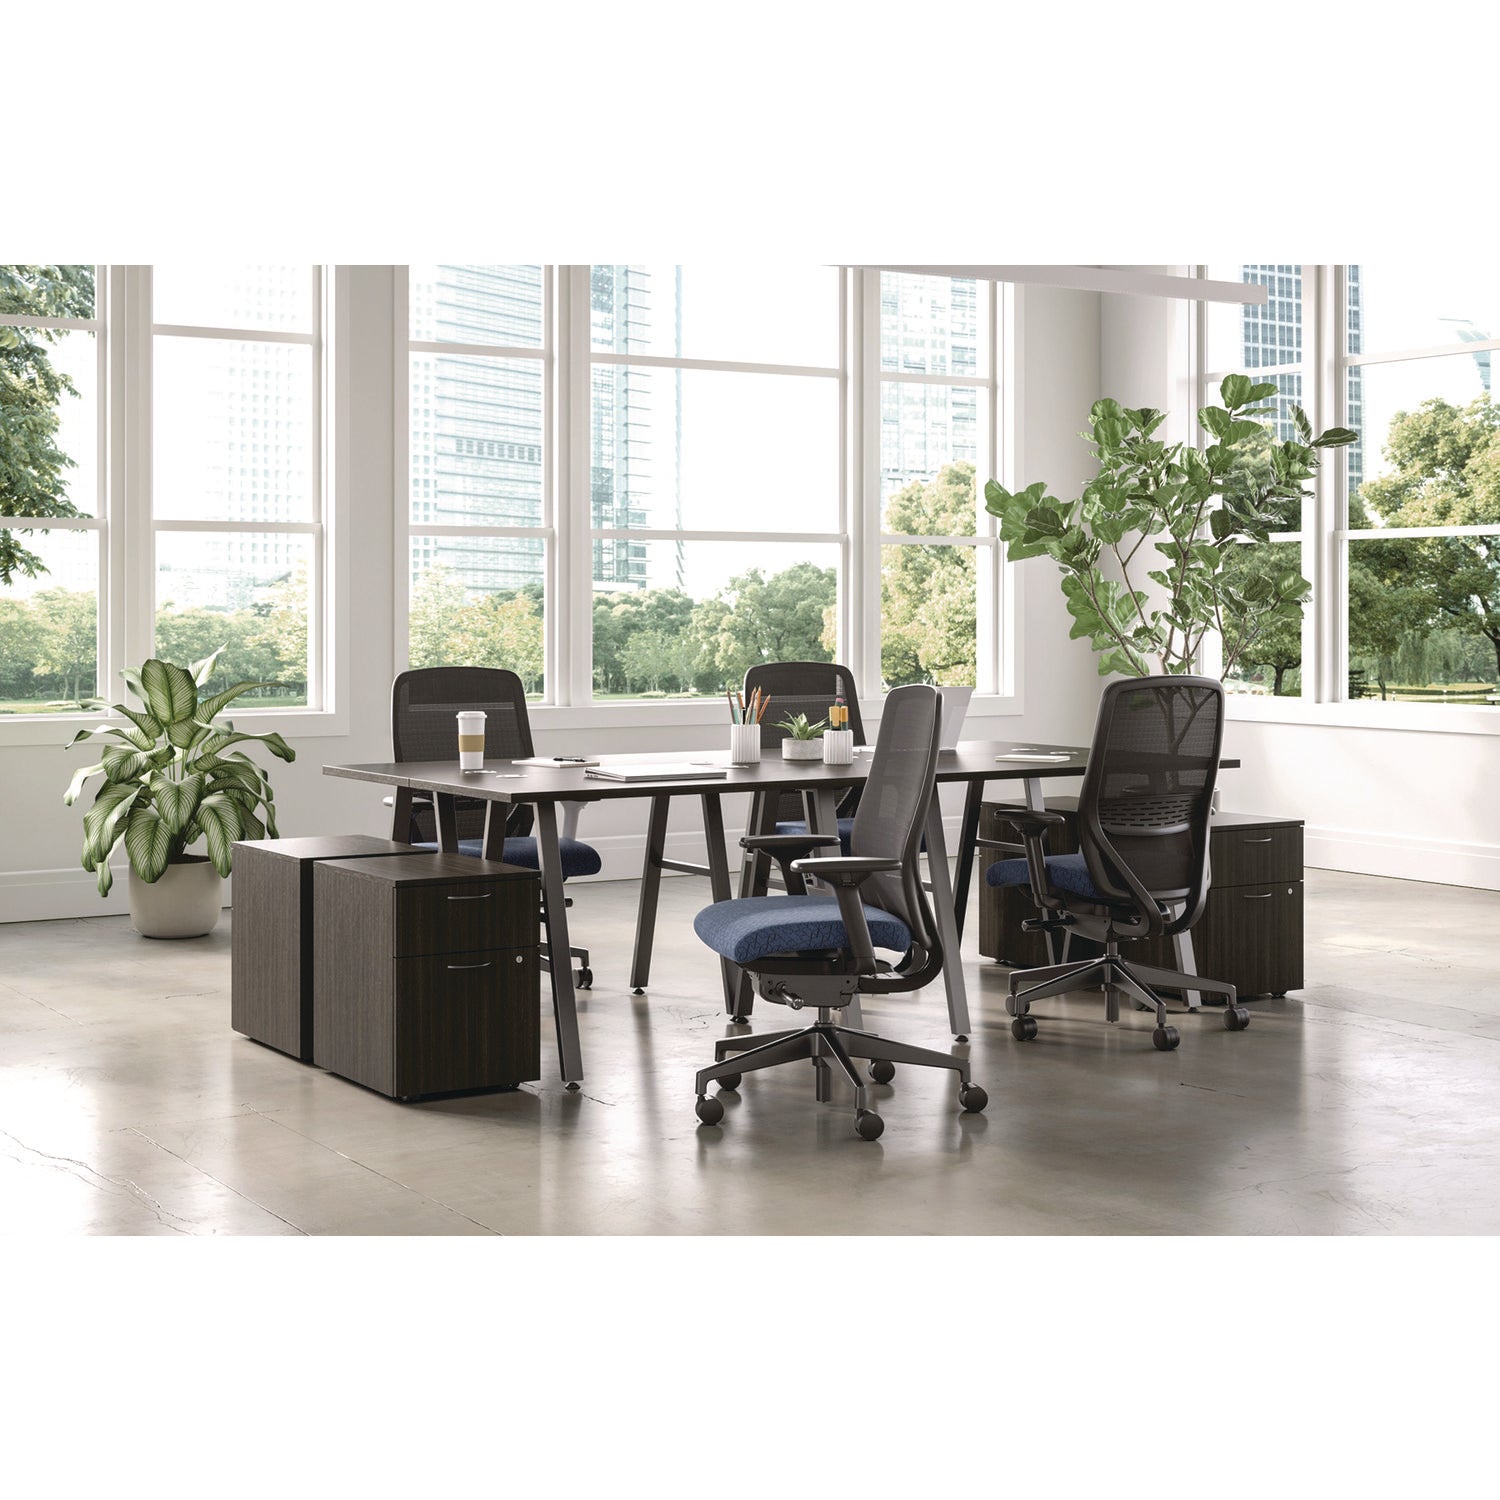 Nucleus Series Recharge Task Chair, Up to 300lb, 16.63" to 21.13" Seat Ht, Navy Seat, Black Back/Base - 8